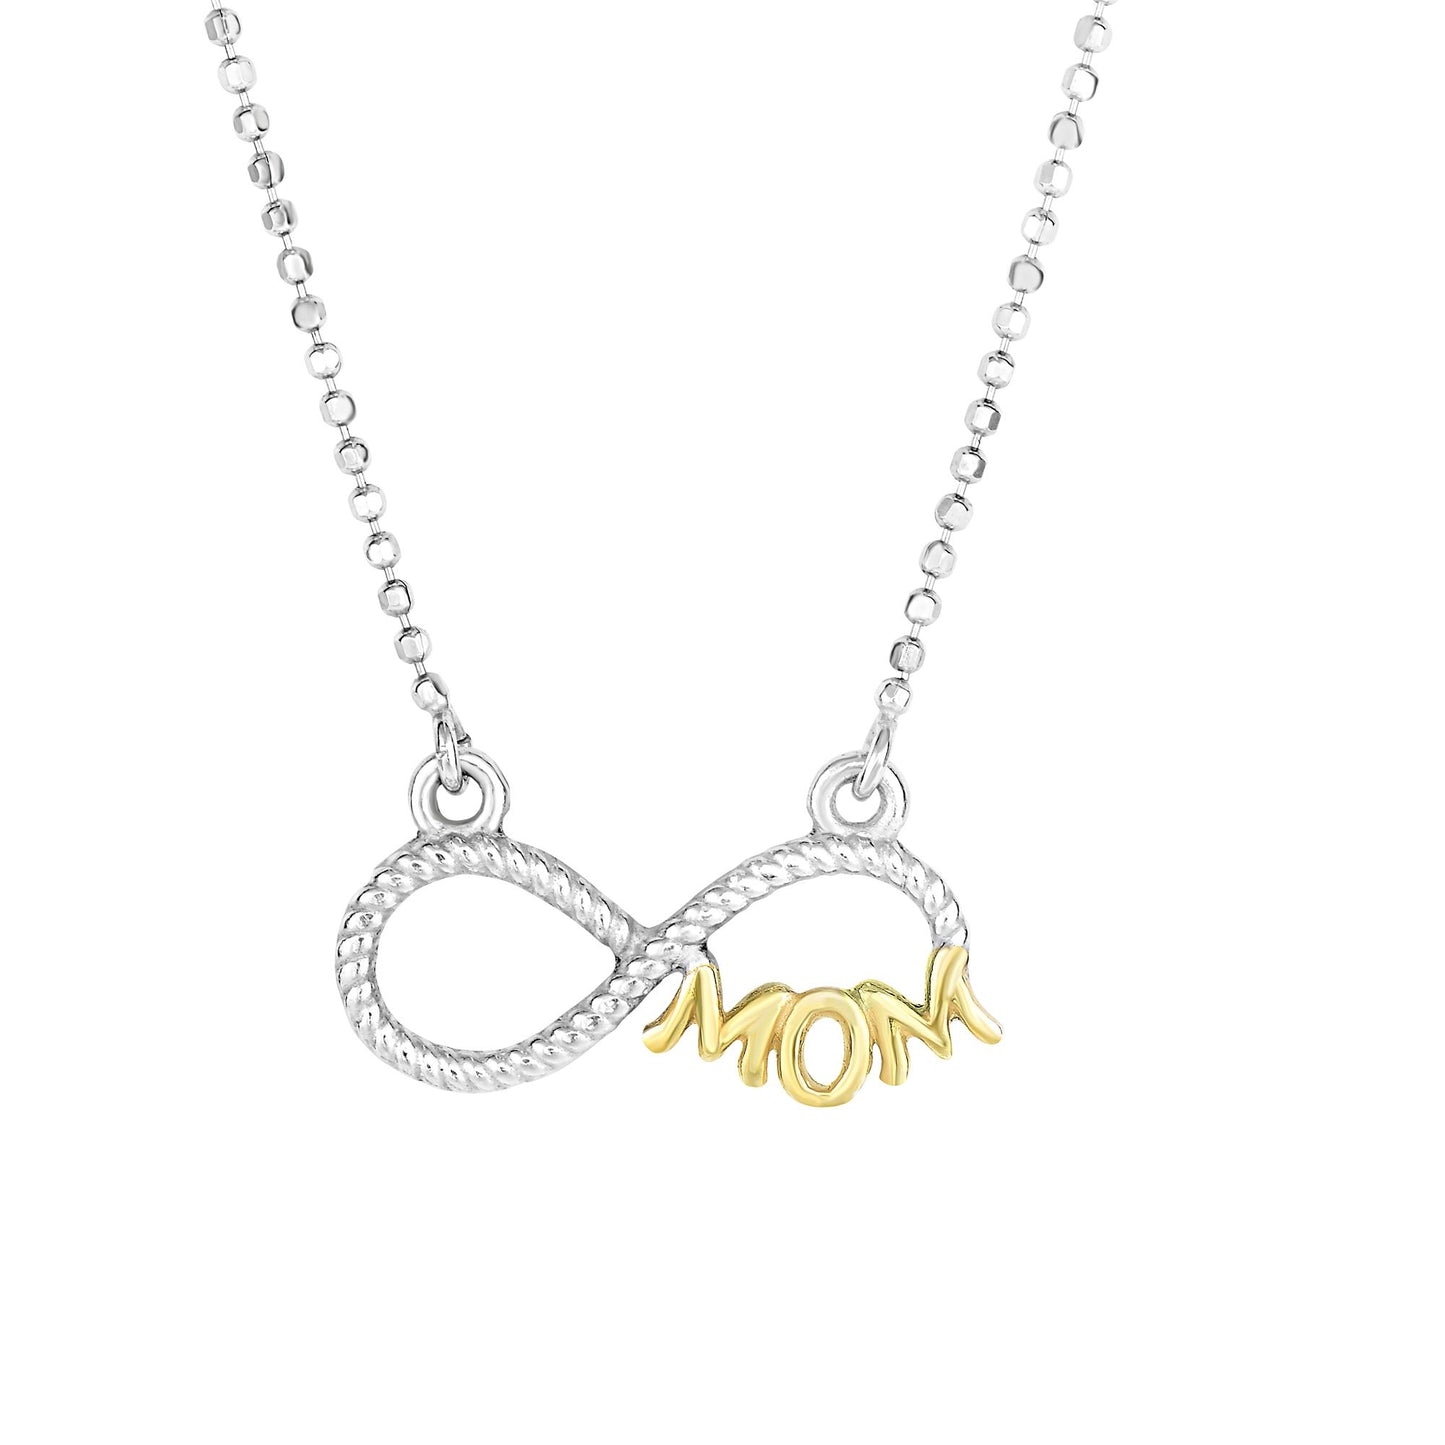 Two Tone Sterling Silver and CZ Infinity Mom Necklace